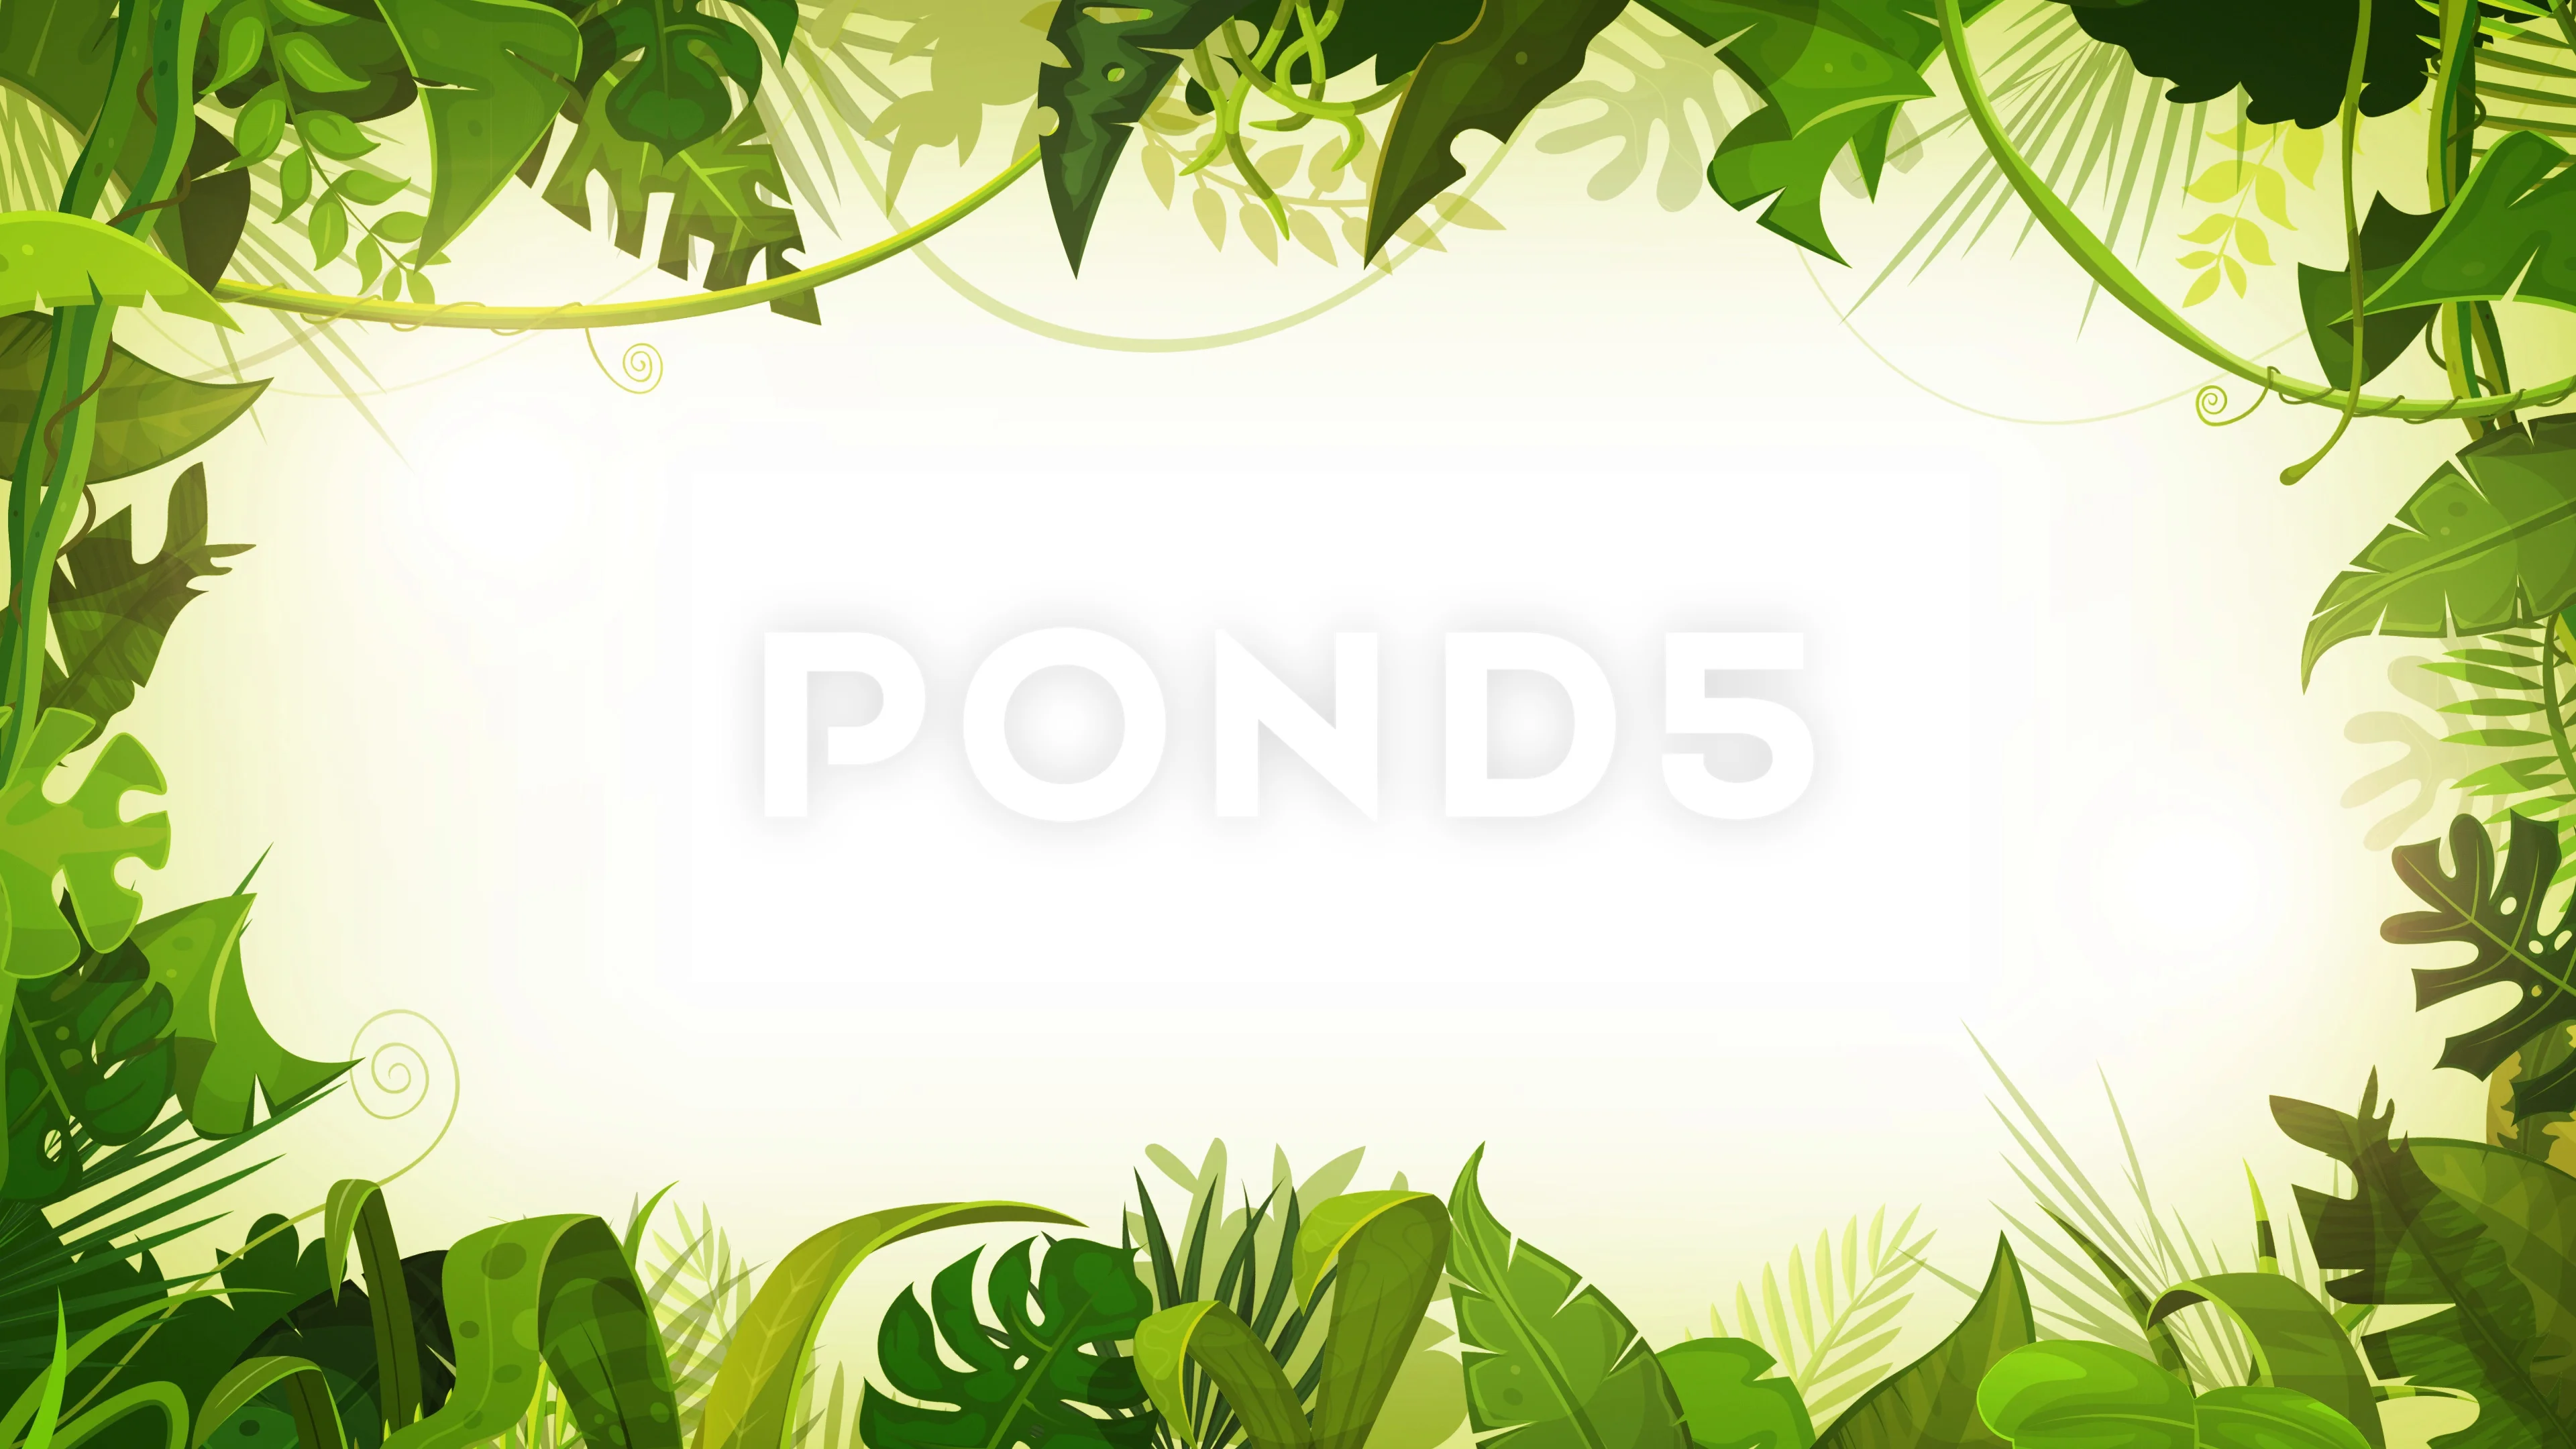 Jungle Background Vector Art Icons and Graphics for Free Download